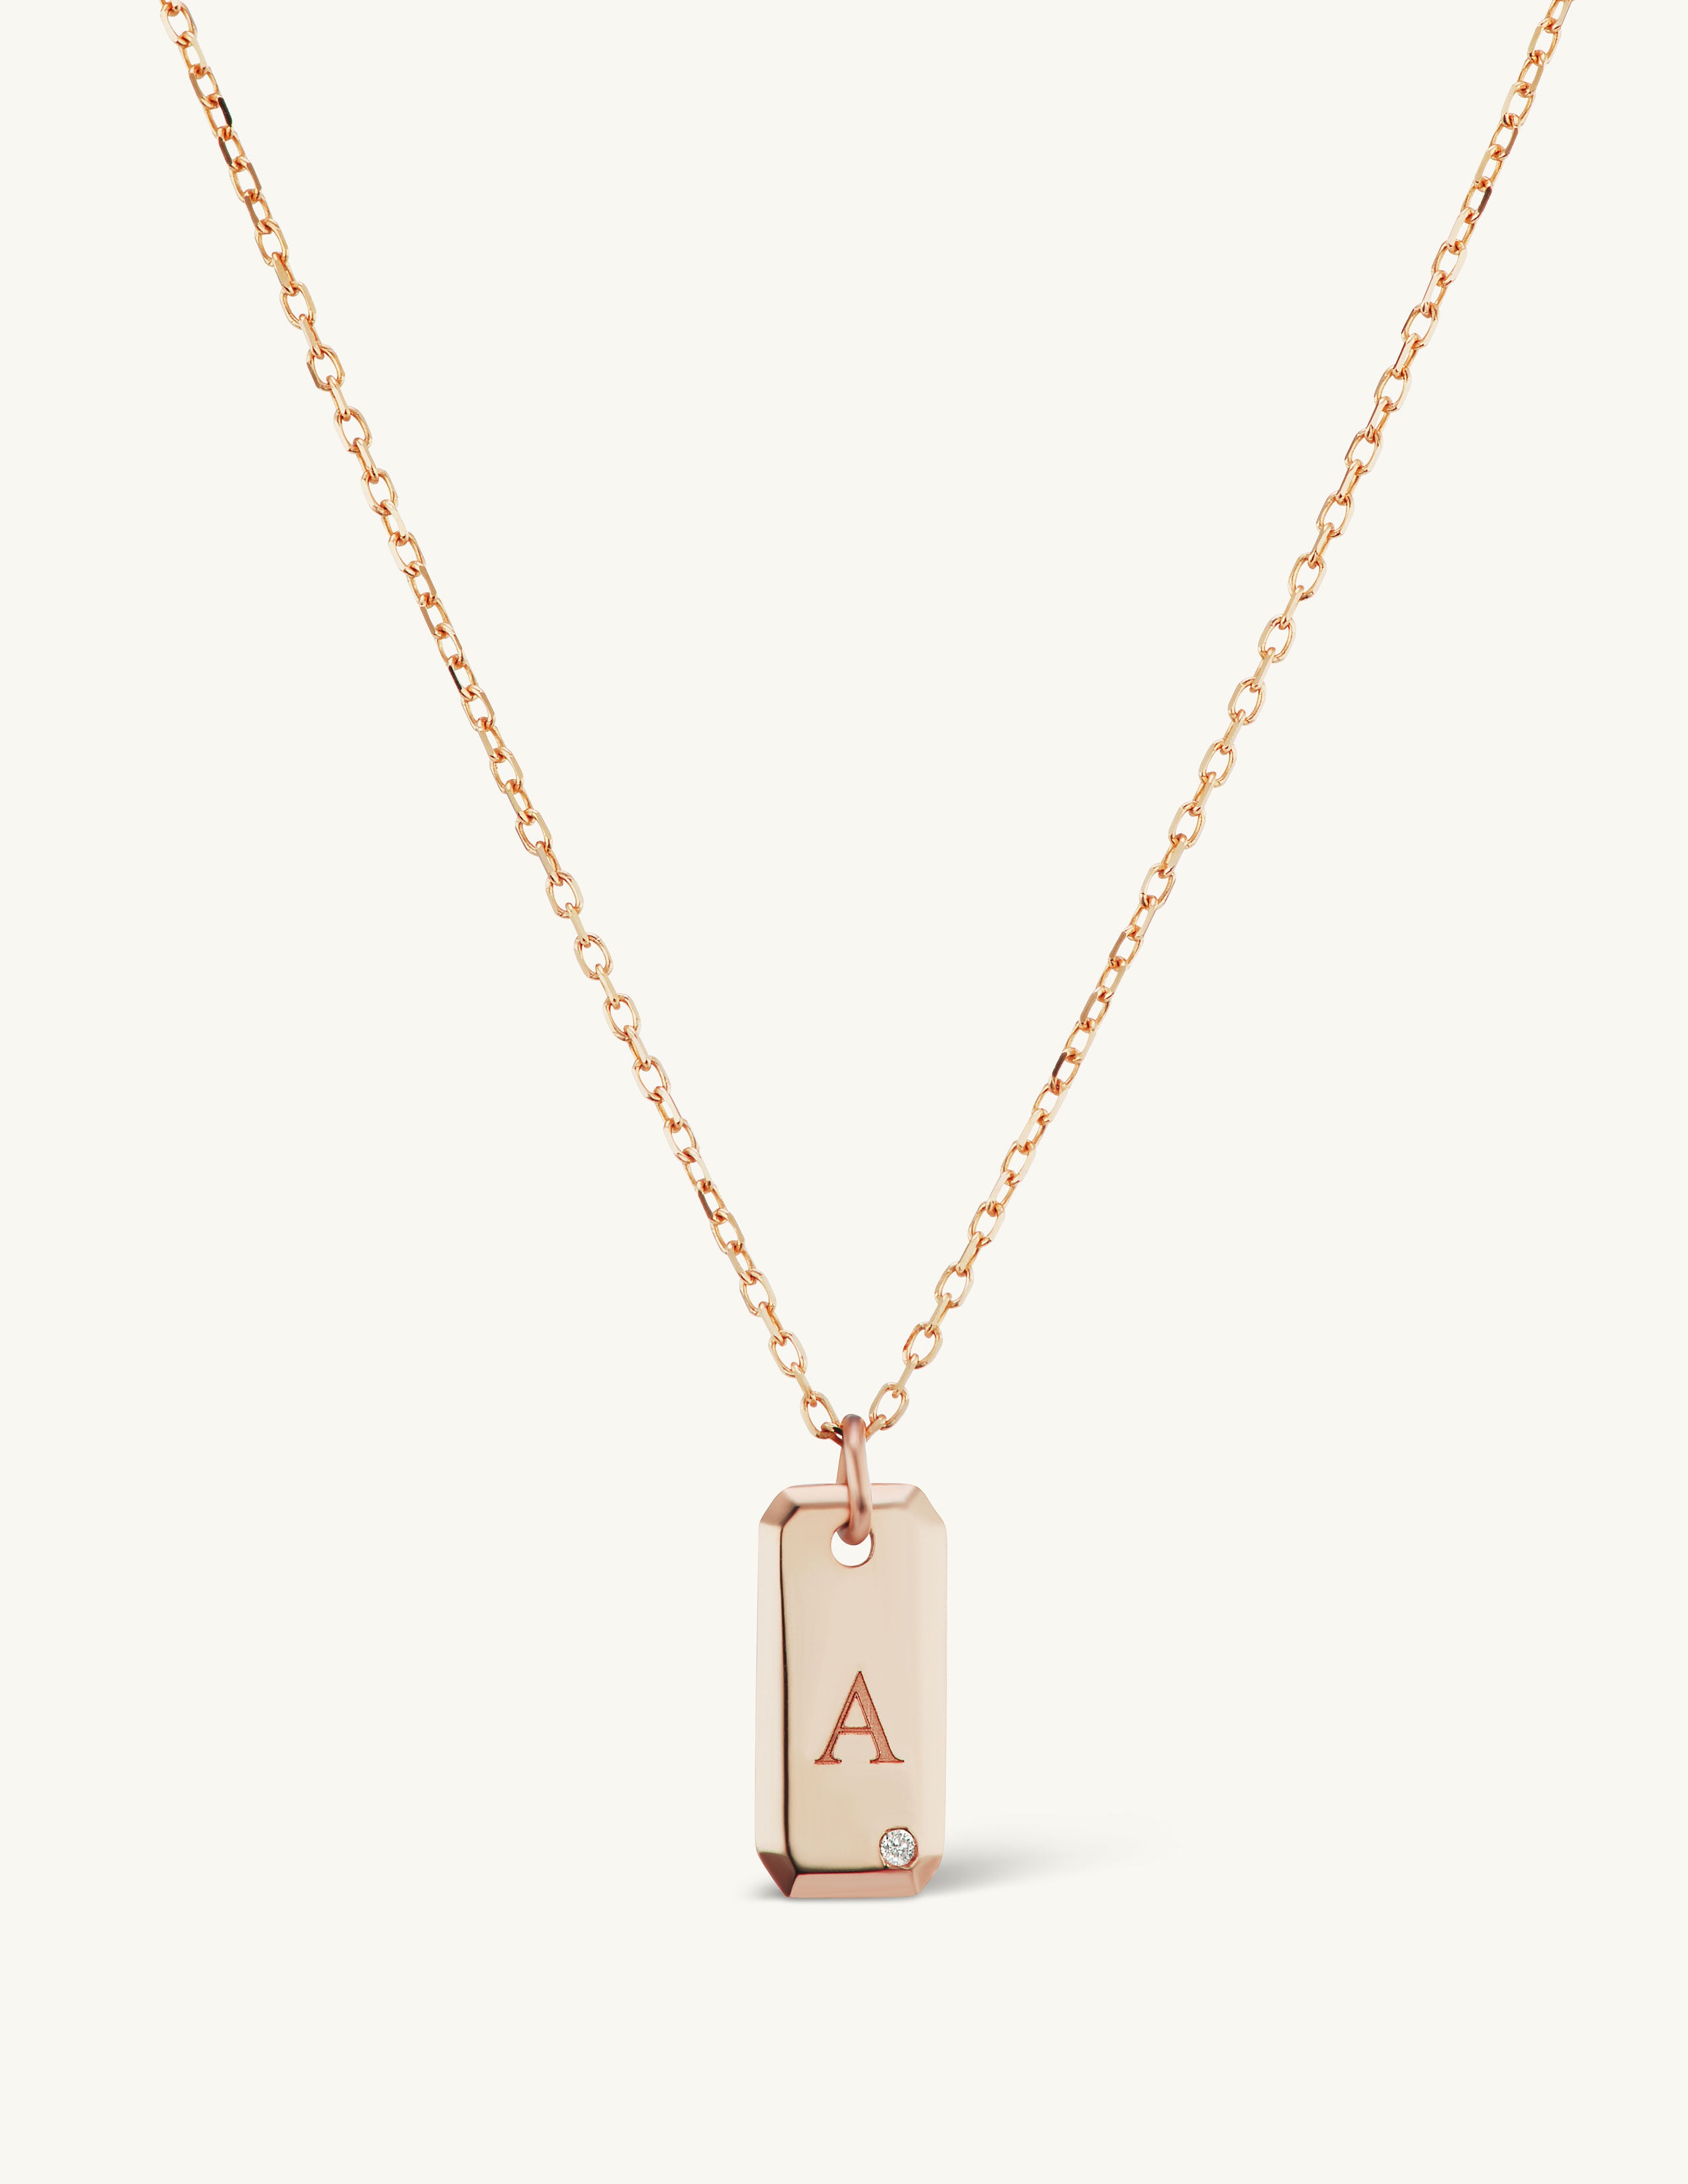 Engraved Initial Tag Necklace with Diamond